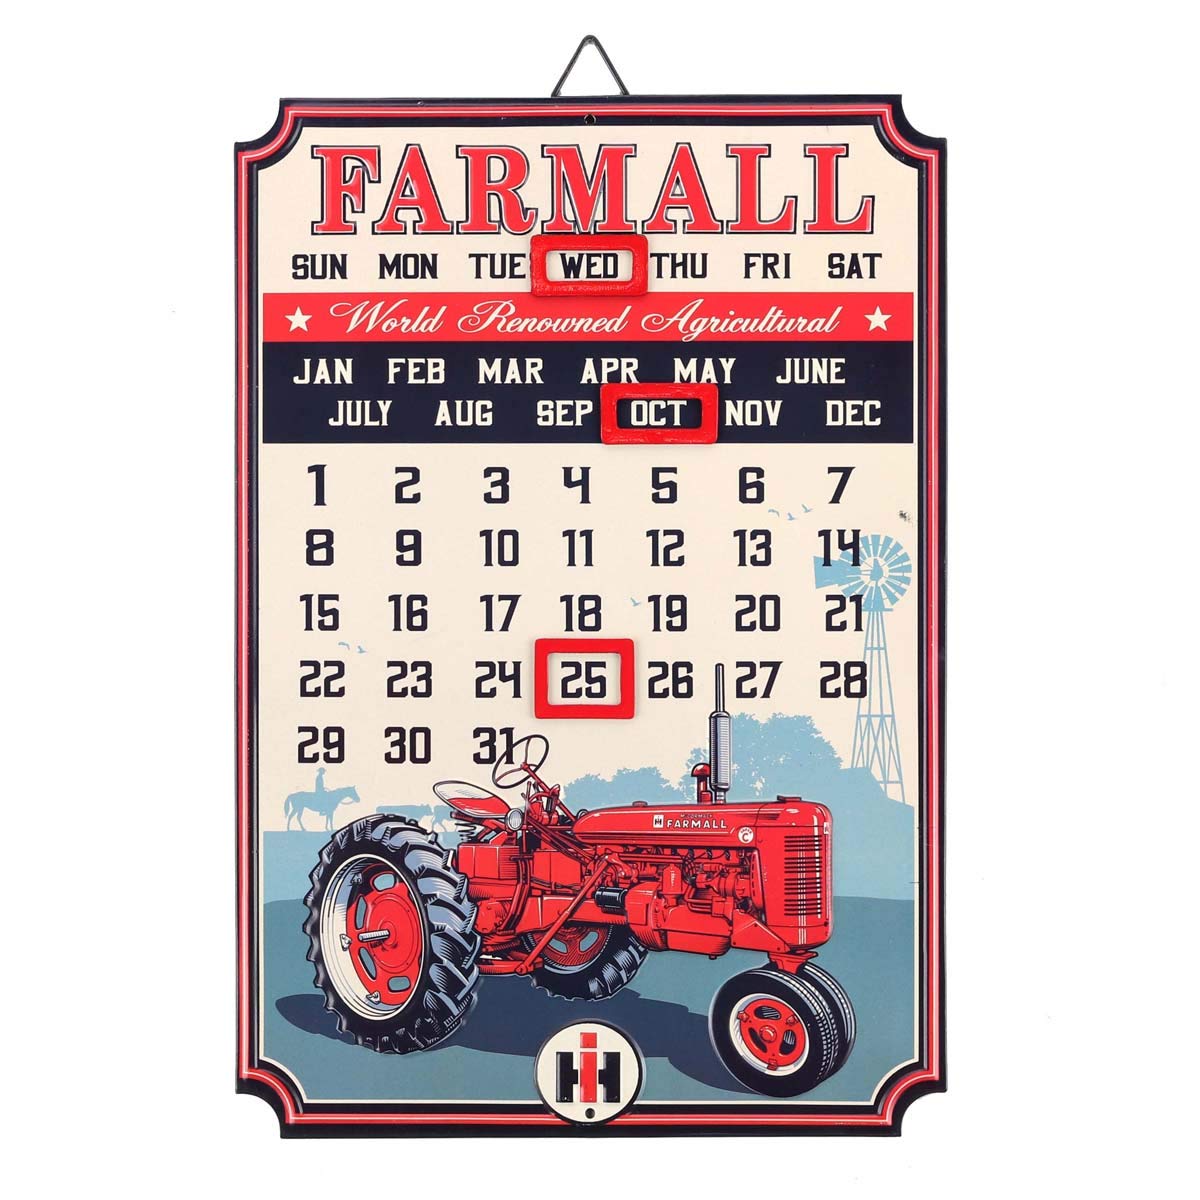 Farmall International Harvester Calendar - Vintage Embossed Metal Farmall Sign With Magnets for Garage or Man Cave Red